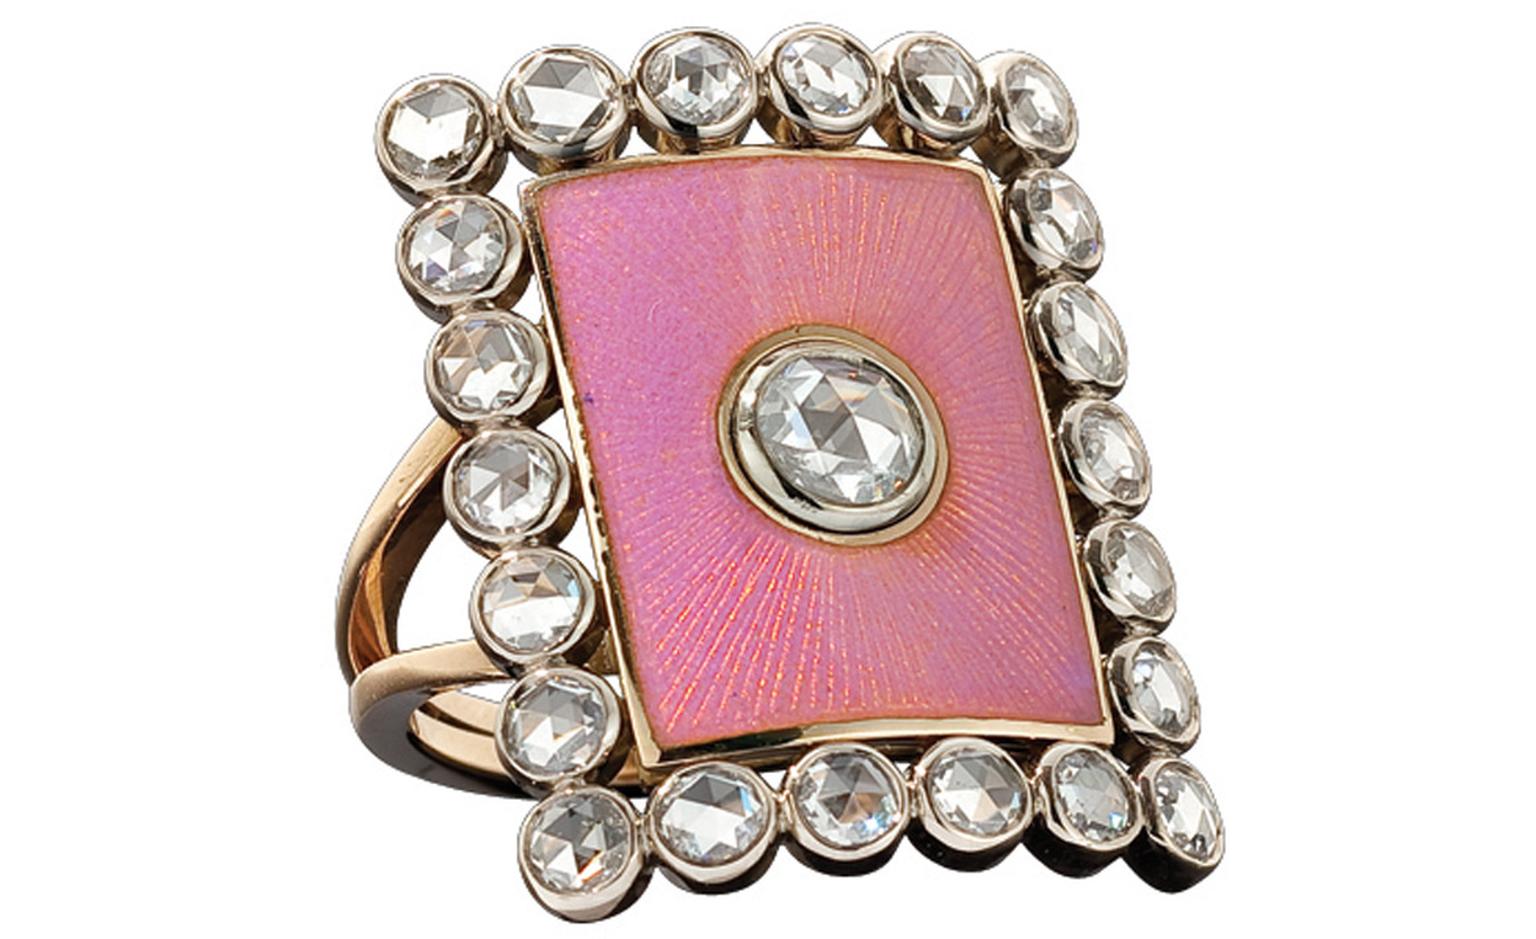 Solange Azagury-Partridge Countess Ring with diamonds and enamel. Made to order and price on request.